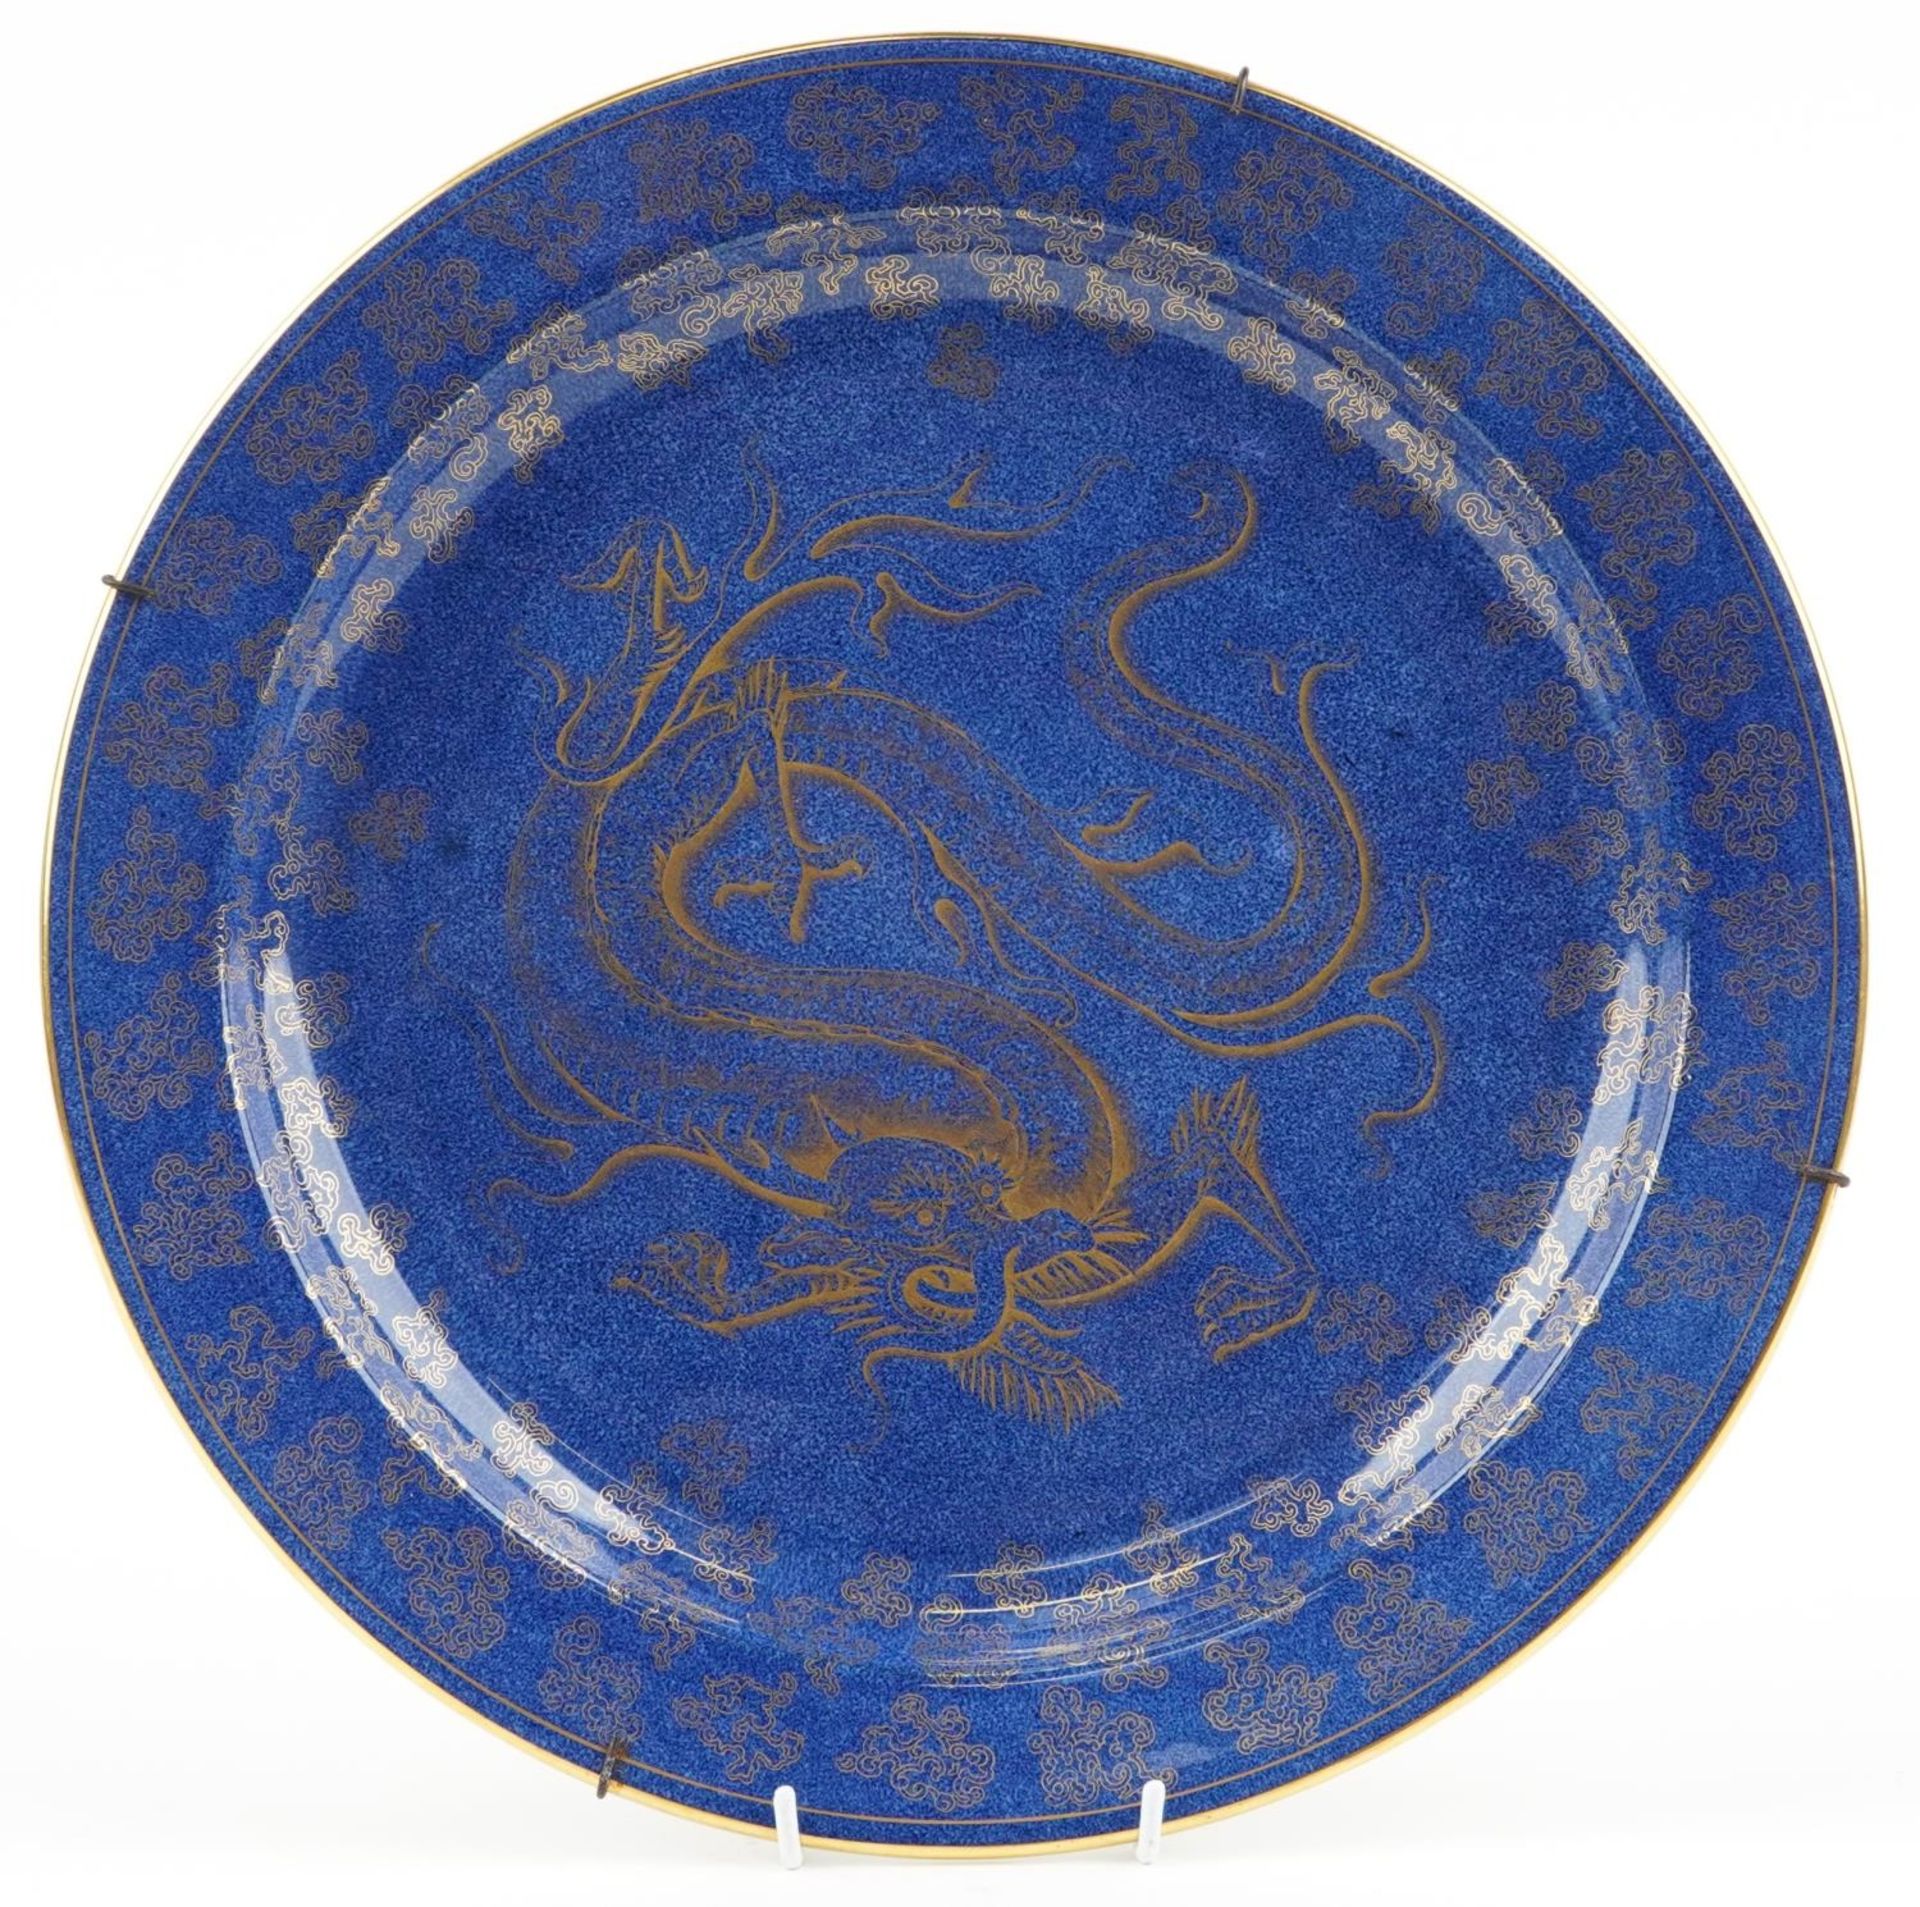 Wedgwood, aesthetic Chinese style powder blue ground lustre wall plaque gilded with a dragon amongst